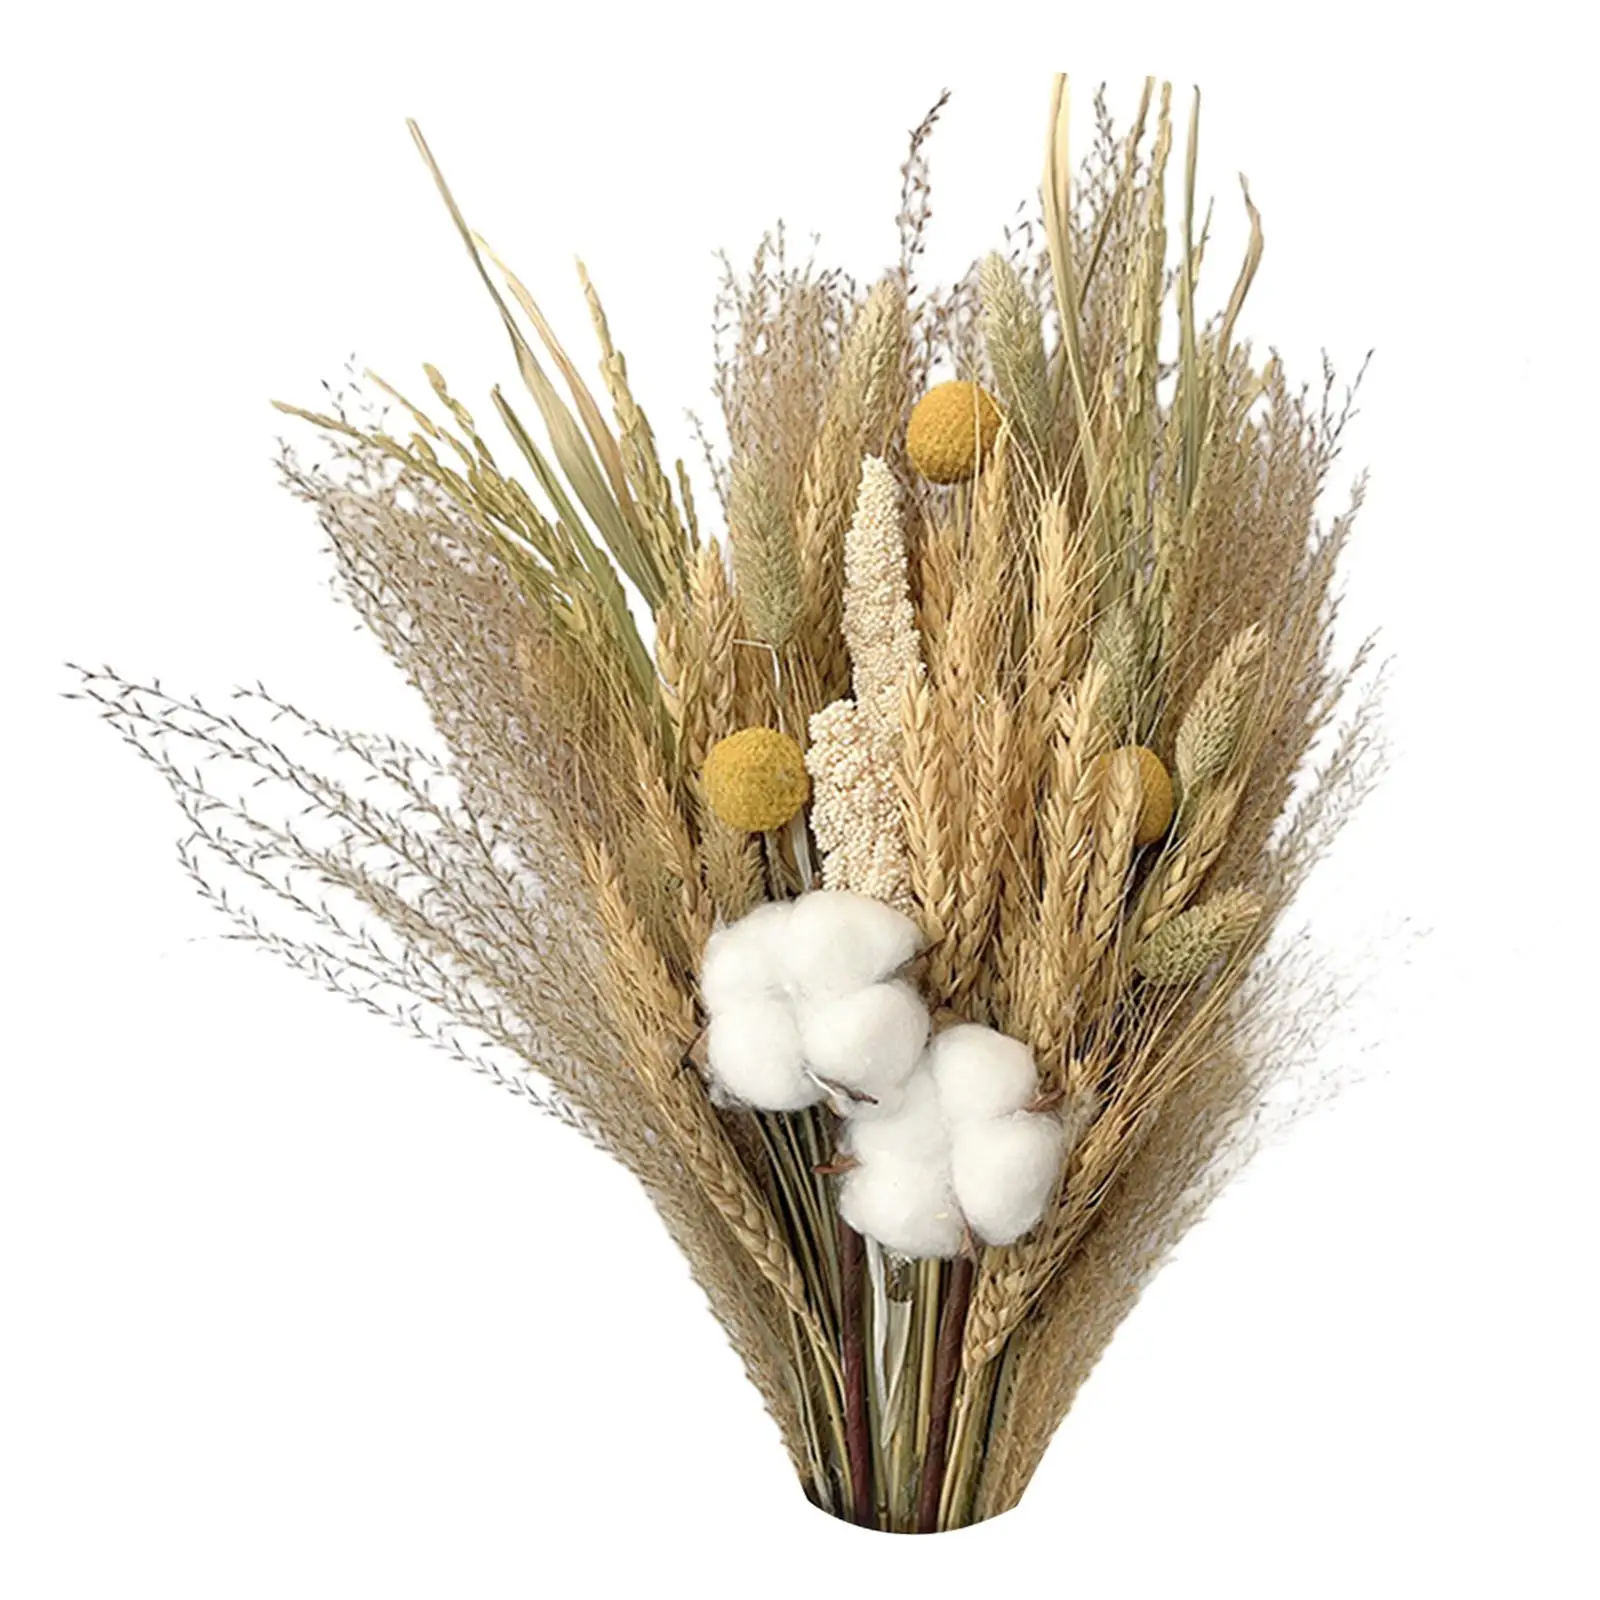 Natural Dried Flower Decorative Dry Flowers for Table Centerpiece Home Dorm